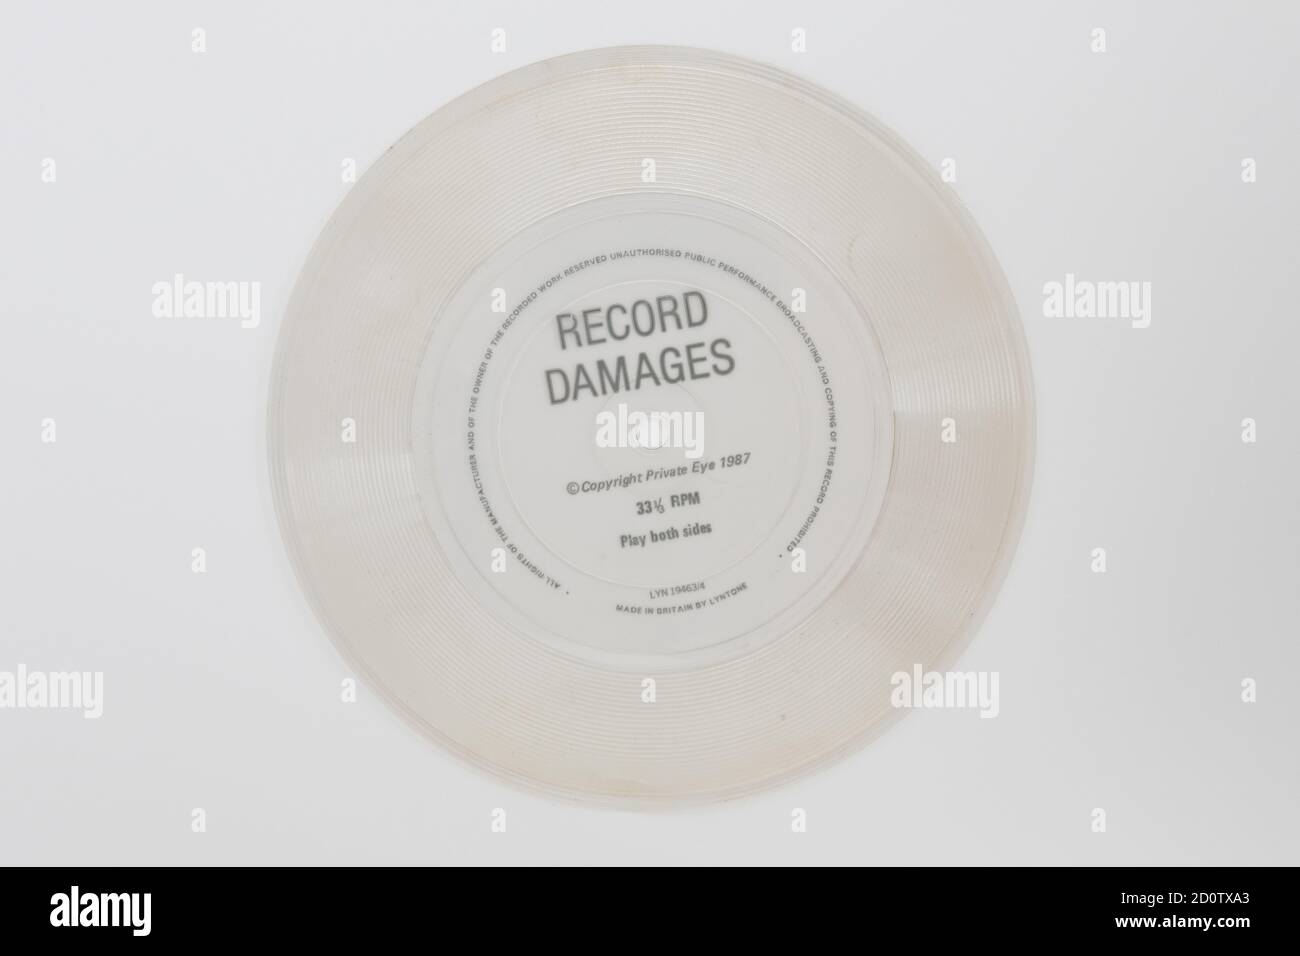 Record Damages clear flexi-disc record by Private Eye Stock Photo